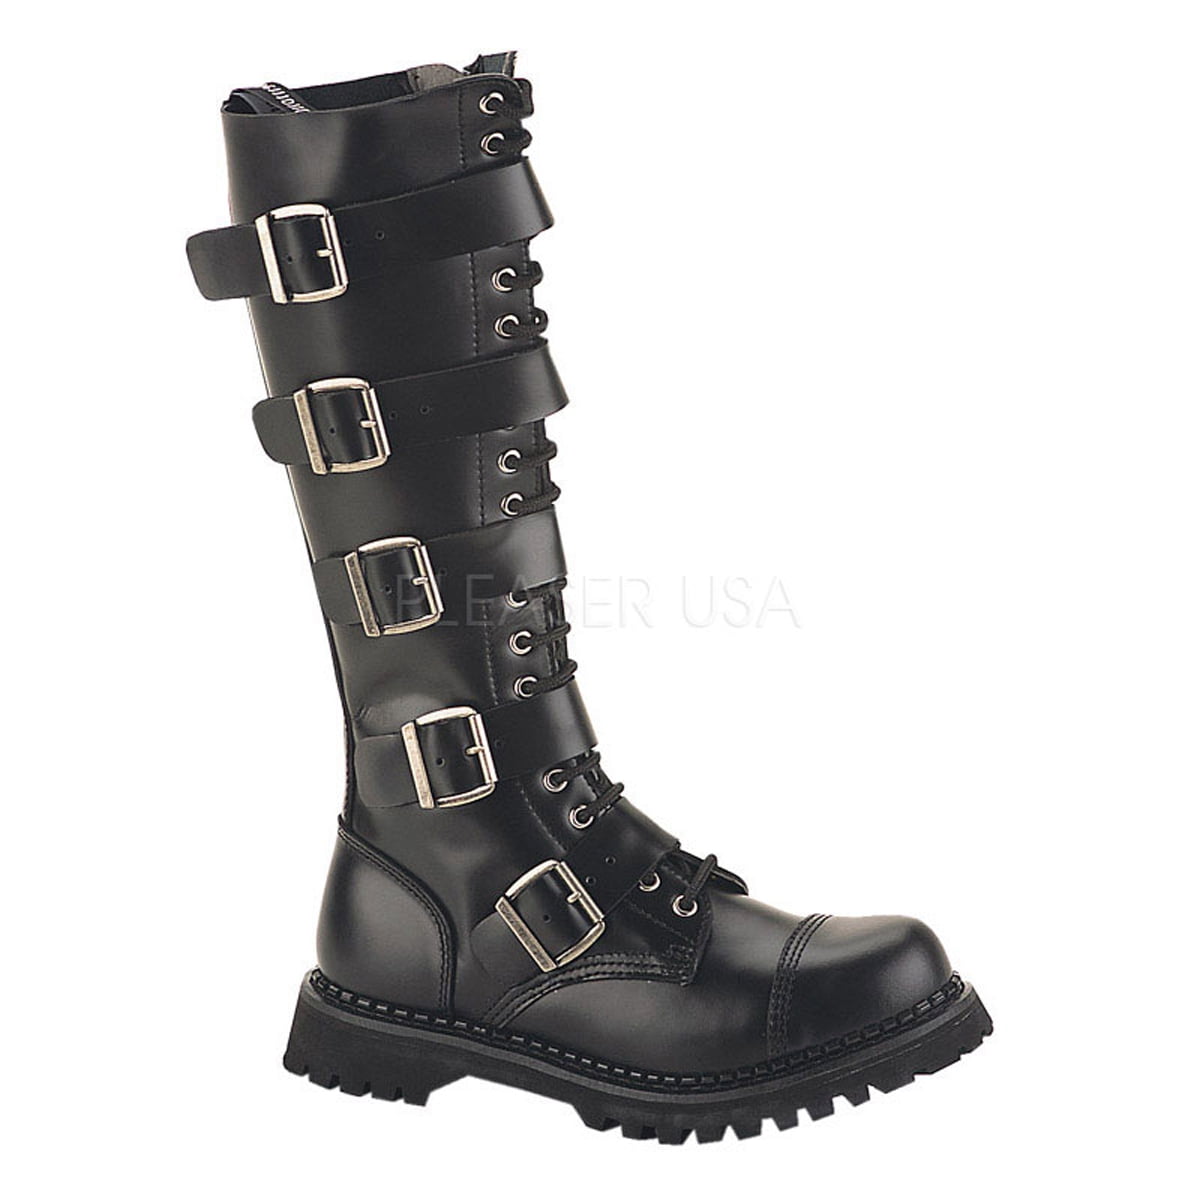 Strap Steel Toe Blk Leather Knee Boot 